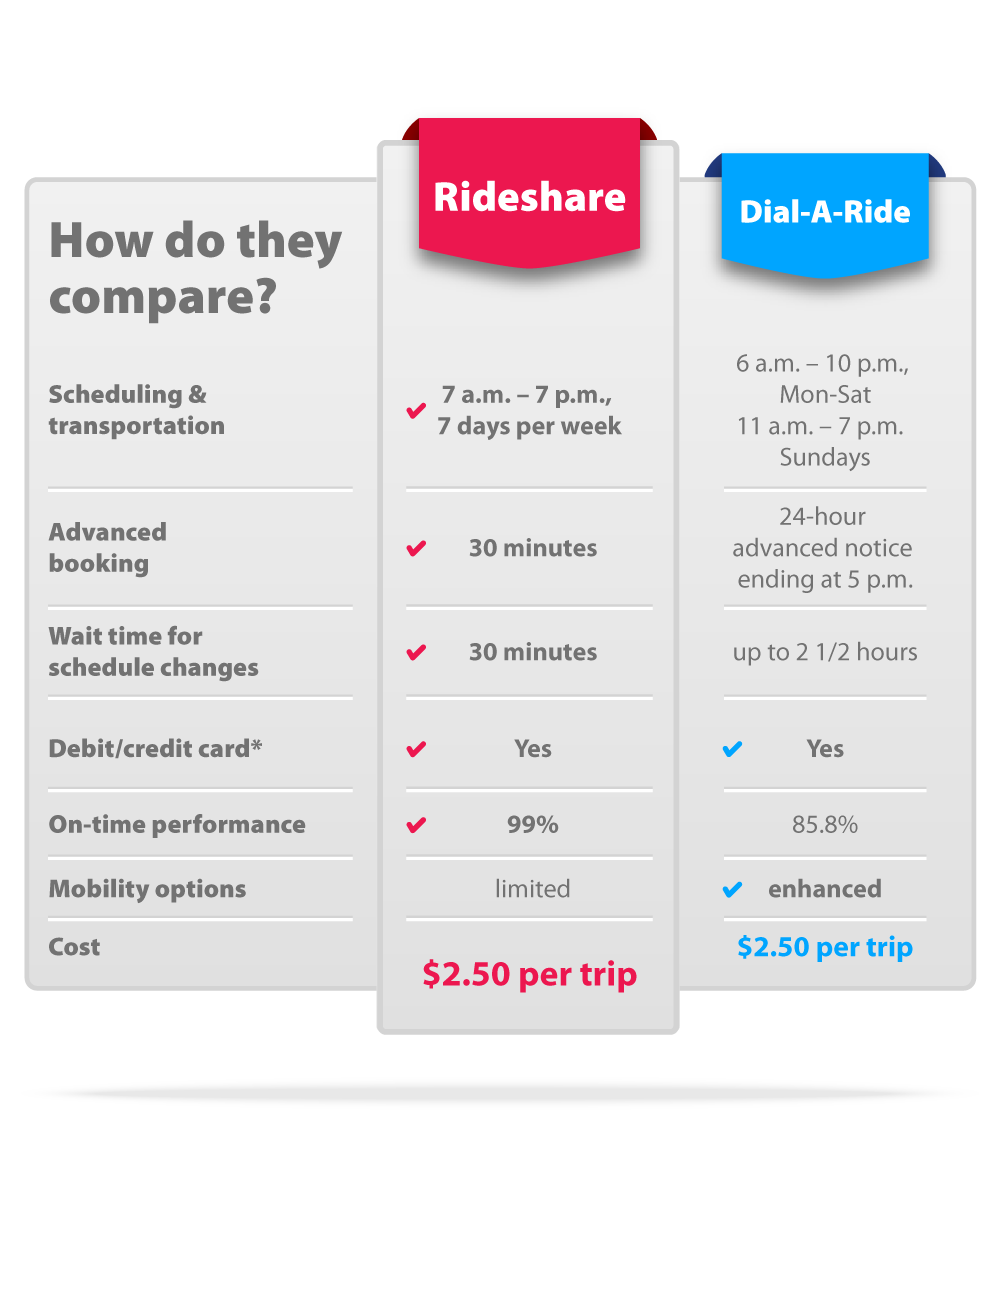 This is a chart comparing Rideshare to Dial-A-Ride